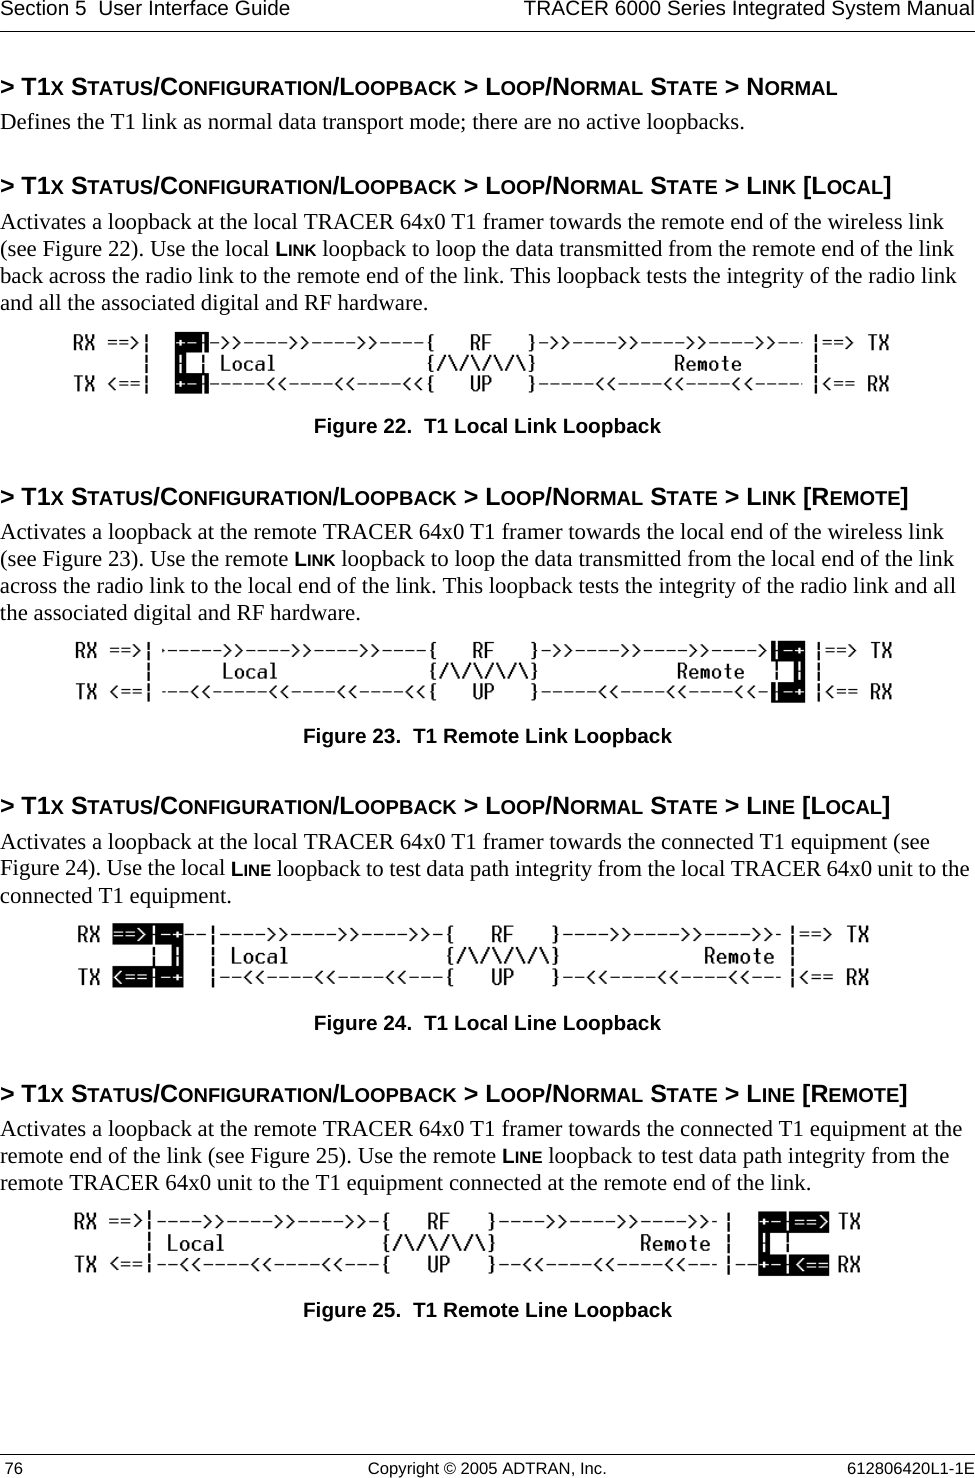 Section 5  User Interface Guide TRACER 6000 Series Integrated System Manual 76 Copyright © 2005 ADTRAN, Inc. 612806420L1-1E&gt; T1X STATUS/CONFIGURATION/LOOPBACK &gt; LOOP/NORMAL STATE &gt; NORMALDefines the T1 link as normal data transport mode; there are no active loopbacks.&gt; T1X STATUS/CONFIGURATION/LOOPBACK &gt; LOOP/NORMAL STATE &gt; LINK [LOCAL]Activates a loopback at the local TRACER 64x0 T1 framer towards the remote end of the wireless link (see Figure 22). Use the local LINK loopback to loop the data transmitted from the remote end of the link back across the radio link to the remote end of the link. This loopback tests the integrity of the radio link and all the associated digital and RF hardware.Figure 22.  T1 Local Link Loopback&gt; T1X STATUS/CONFIGURATION/LOOPBACK &gt; LOOP/NORMAL STATE &gt; LINK [REMOTE]Activates a loopback at the remote TRACER 64x0 T1 framer towards the local end of the wireless link (see Figure 23). Use the remote LINK loopback to loop the data transmitted from the local end of the link across the radio link to the local end of the link. This loopback tests the integrity of the radio link and all the associated digital and RF hardware.Figure 23.  T1 Remote Link Loopback&gt; T1X STATUS/CONFIGURATION/LOOPBACK &gt; LOOP/NORMAL STATE &gt; LINE [LOCAL]Activates a loopback at the local TRACER 64x0 T1 framer towards the connected T1 equipment (see Figure 24). Use the local LINE loopback to test data path integrity from the local TRACER 64x0 unit to the connected T1 equipment.Figure 24.  T1 Local Line Loopback&gt; T1X STATUS/CONFIGURATION/LOOPBACK &gt; LOOP/NORMAL STATE &gt; LINE [REMOTE]Activates a loopback at the remote TRACER 64x0 T1 framer towards the connected T1 equipment at the remote end of the link (see Figure 25). Use the remote LINE loopback to test data path integrity from the remote TRACER 64x0 unit to the T1 equipment connected at the remote end of the link.Figure 25.  T1 Remote Line Loopback